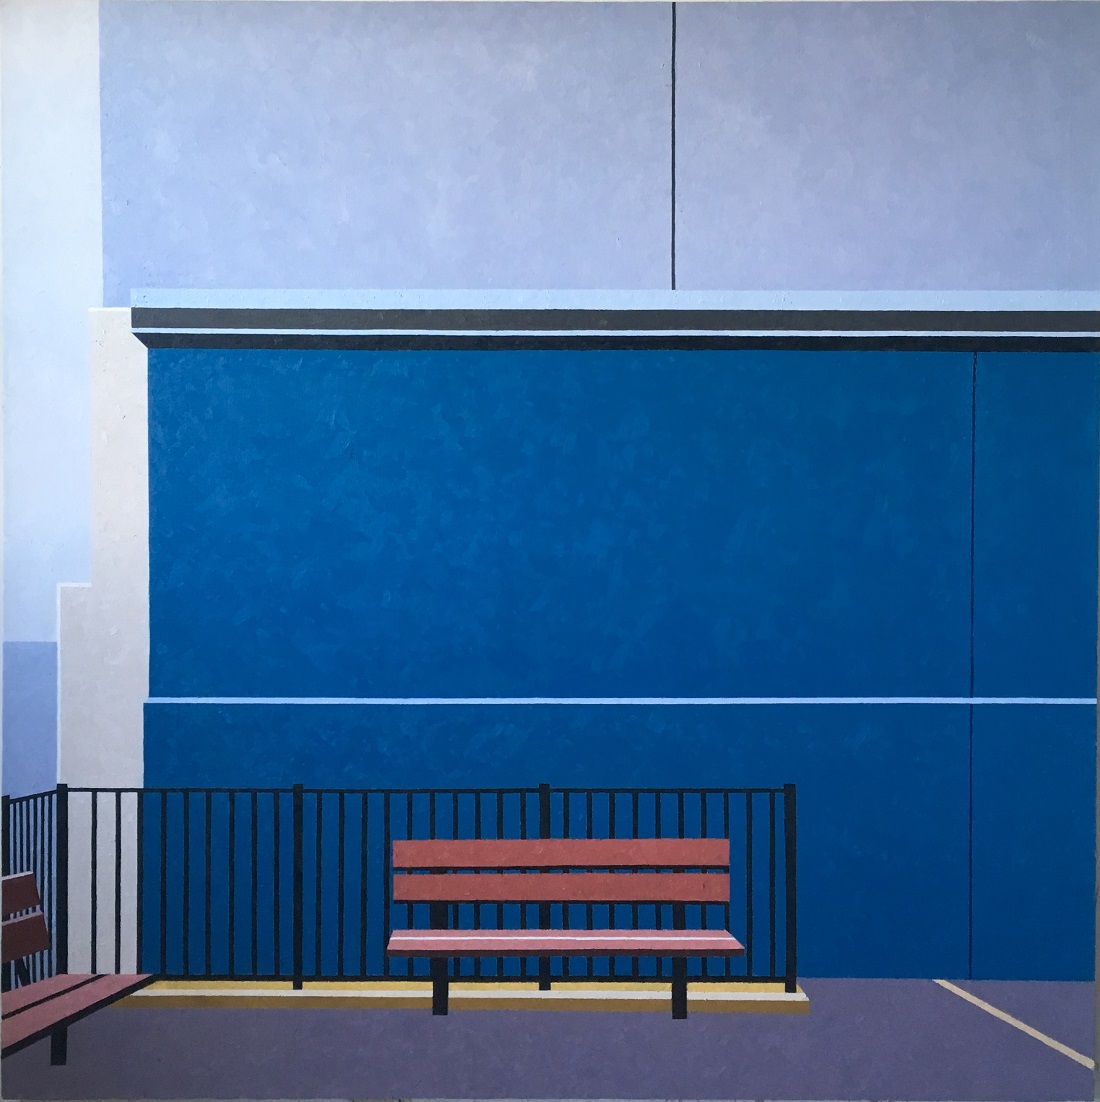 
		                					Roger Winter		                																	
																											<i>PS 93,</i>  
																																								2018, 
																																								oil on linen, 
																																								72 x 72 inches 
																								
		                				